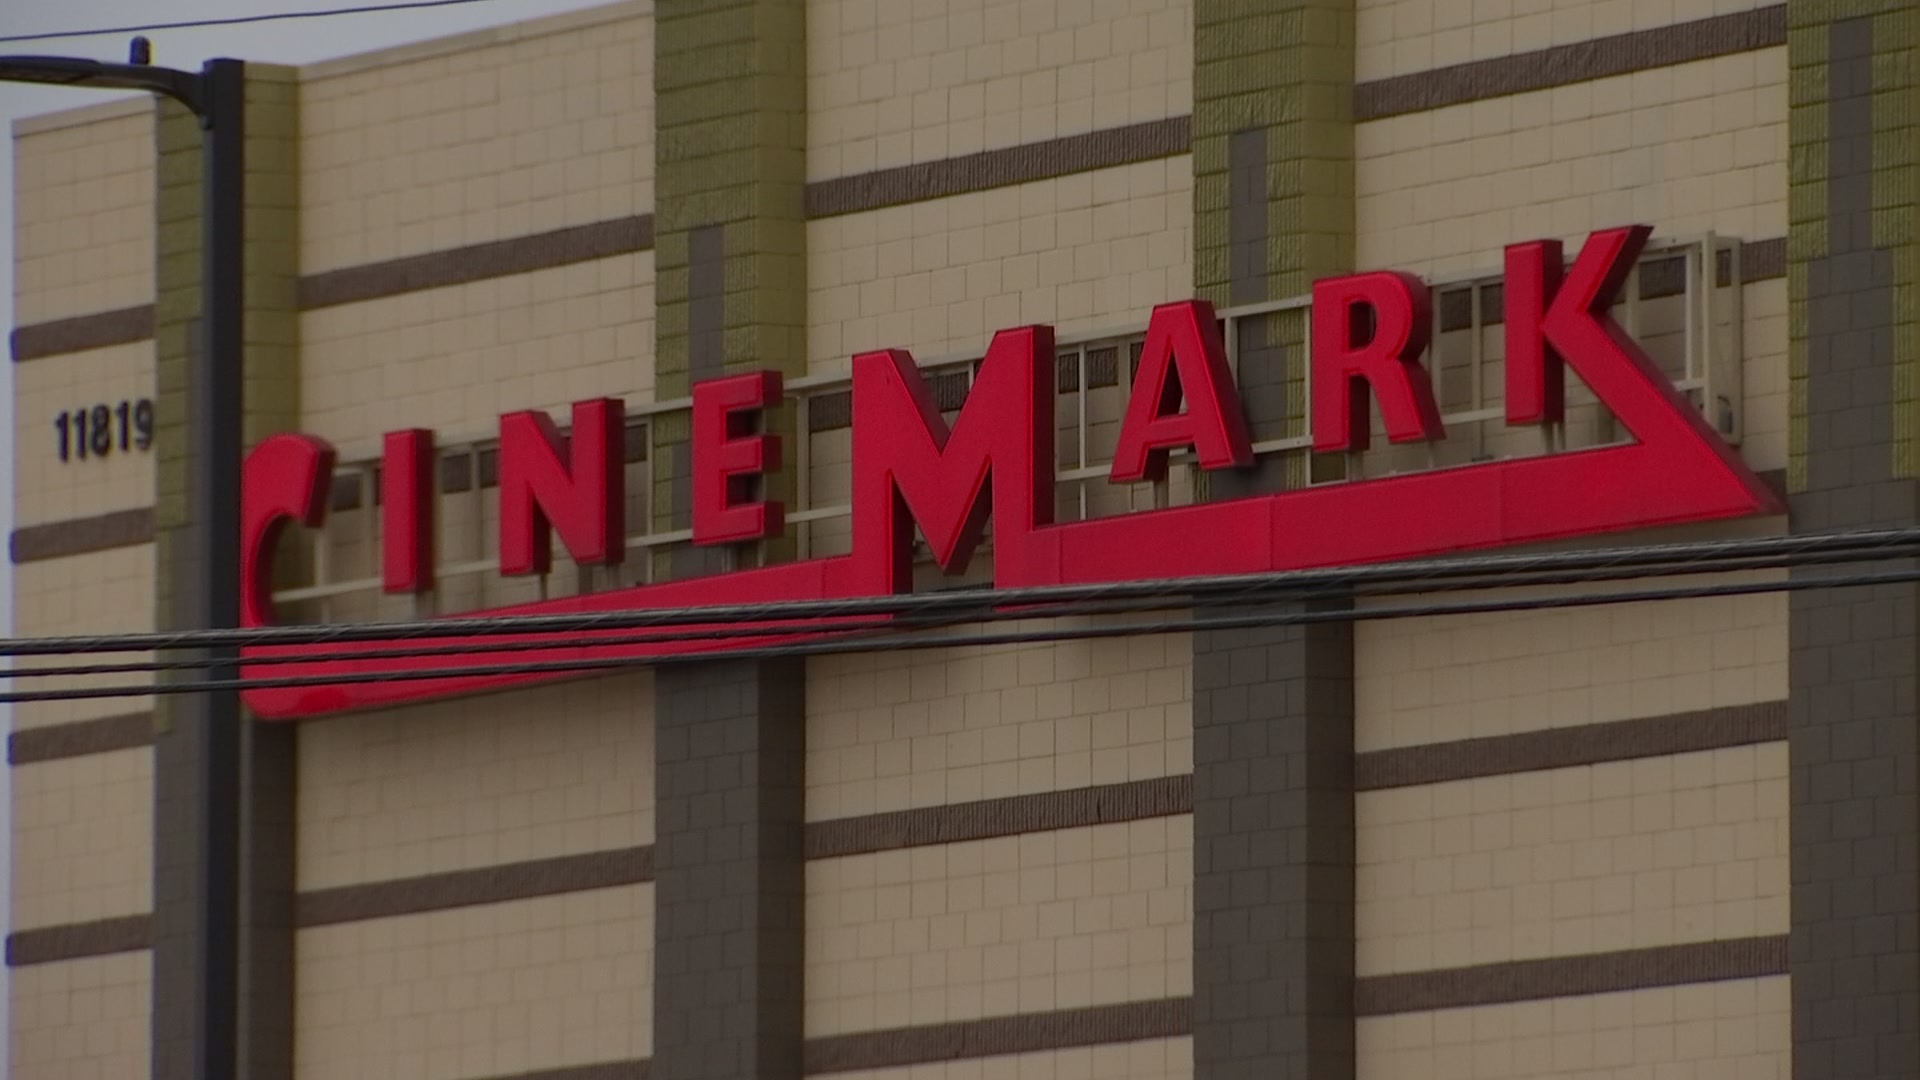 City approves redesign of soon-to-reopen Northpark cinema